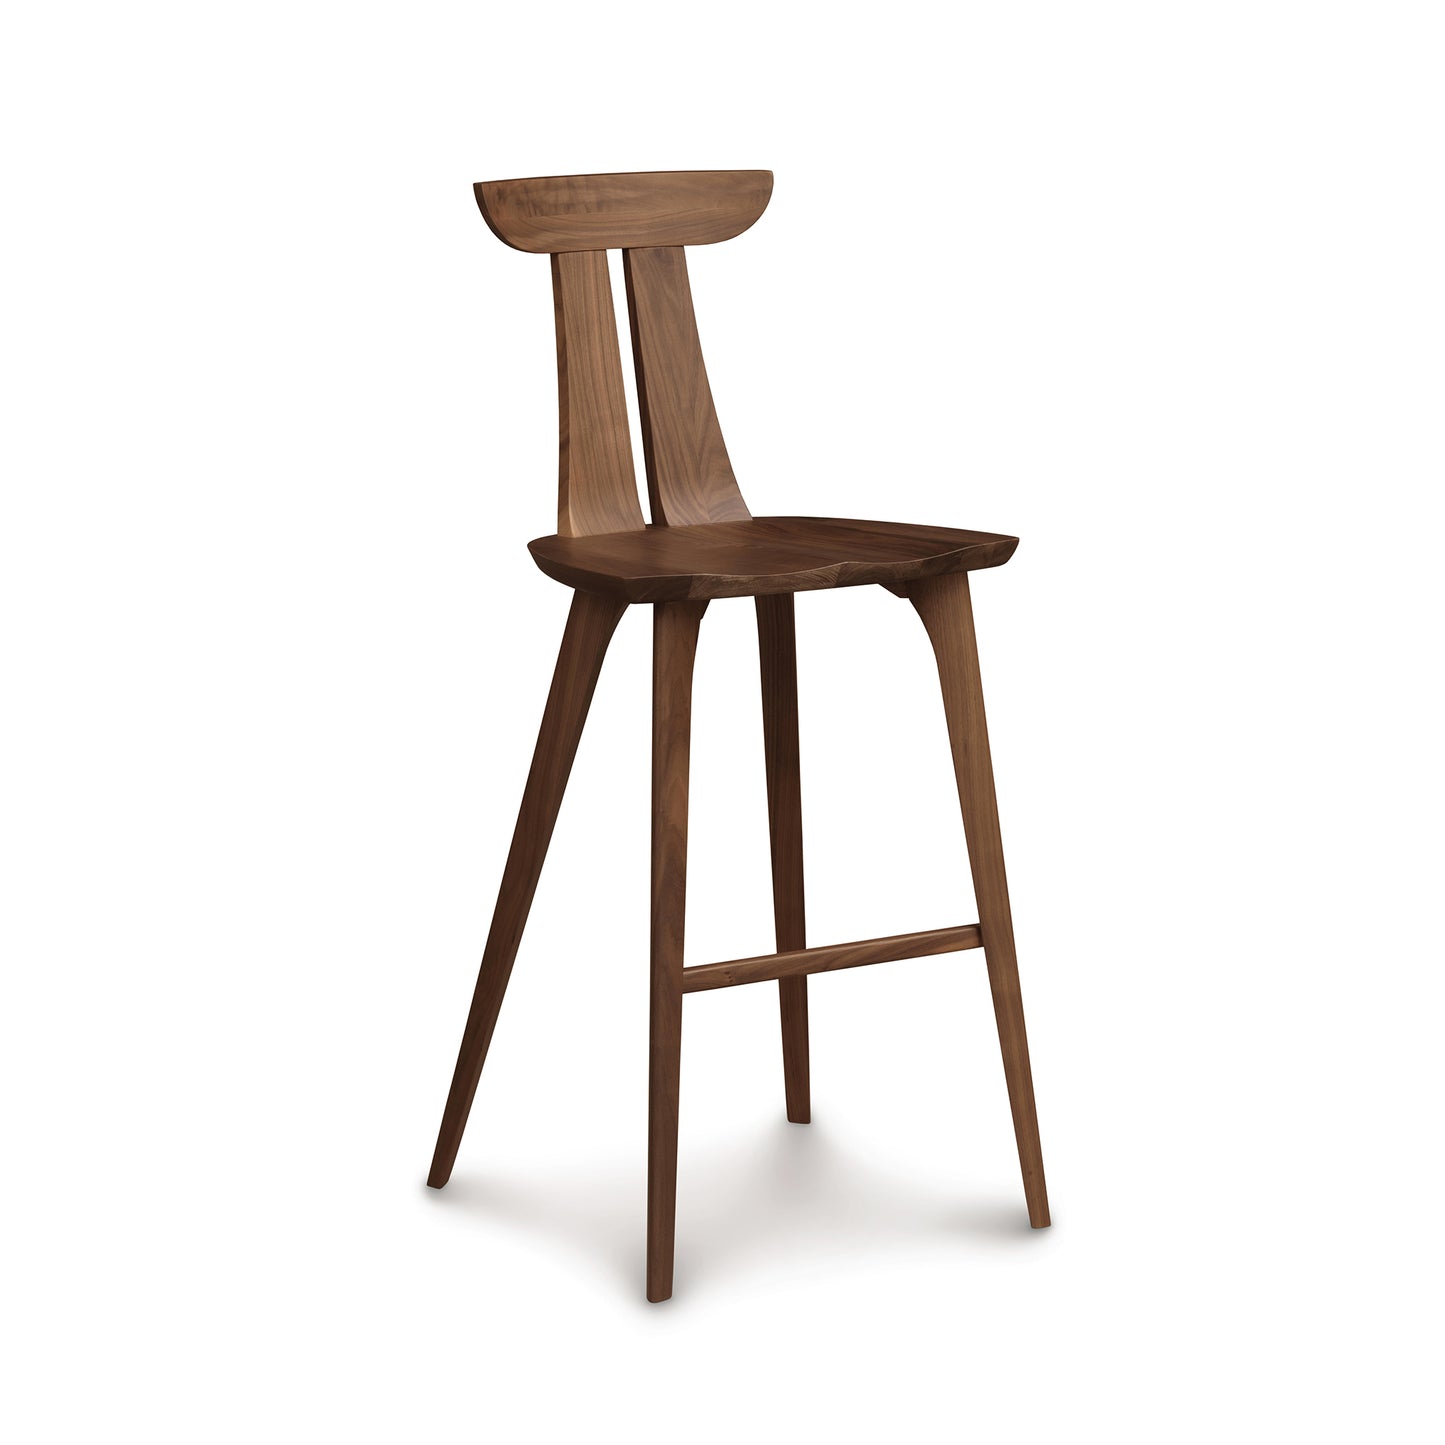 A modern solid American hardwood Estelle bar stool from Copeland Furniture with four legs and a contoured seat against a white background.